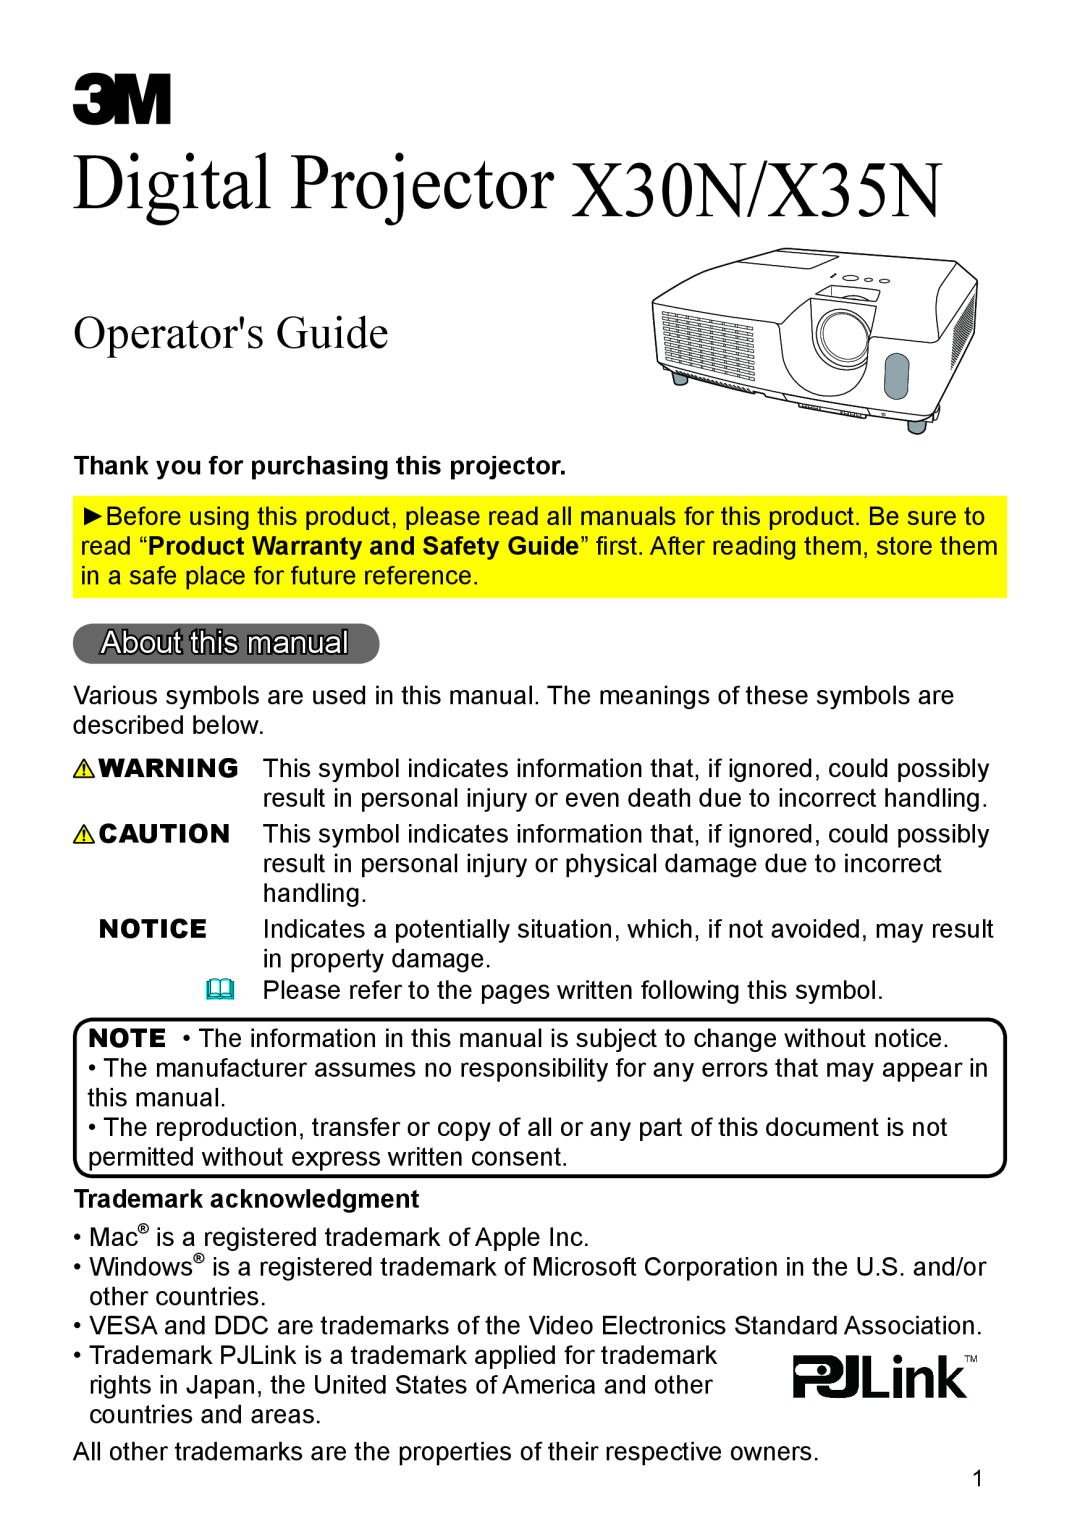 3M X35N warranty About this manual, Thank you for purchasing this projector, Trademark acknowledgment, Operators Guide 